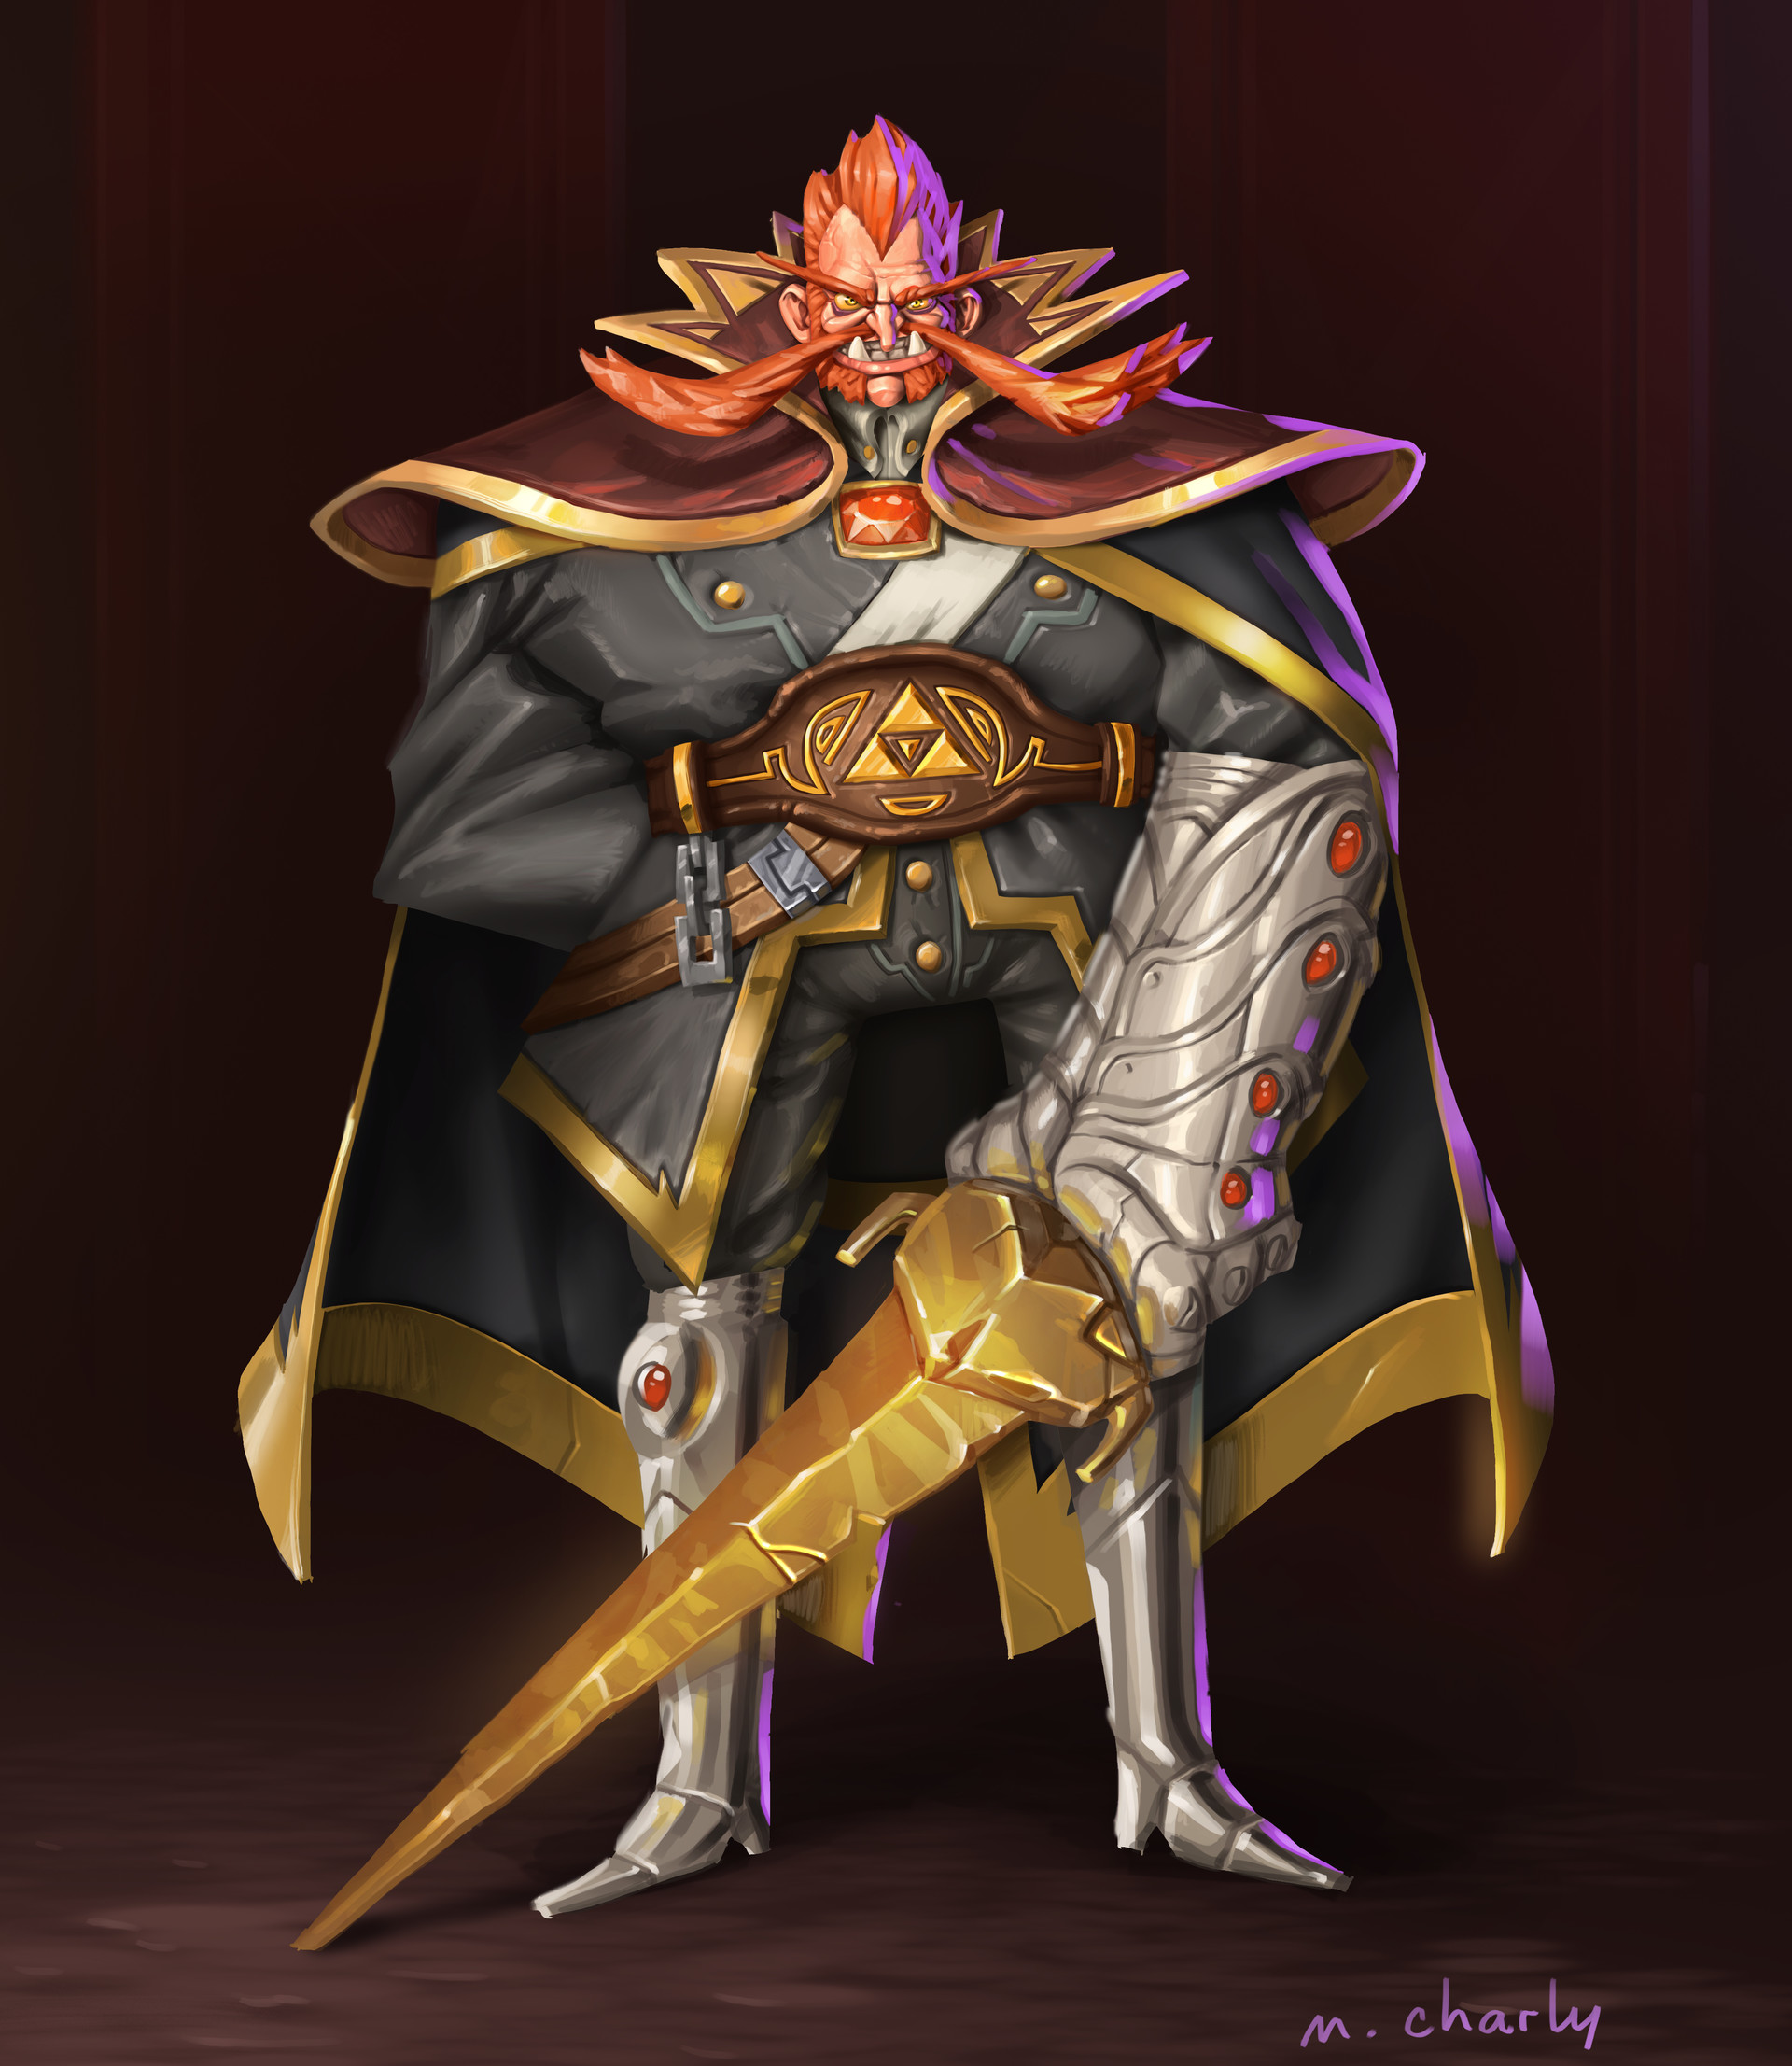 Fan art of Ganondorf done for the "Character Design Challenge&...